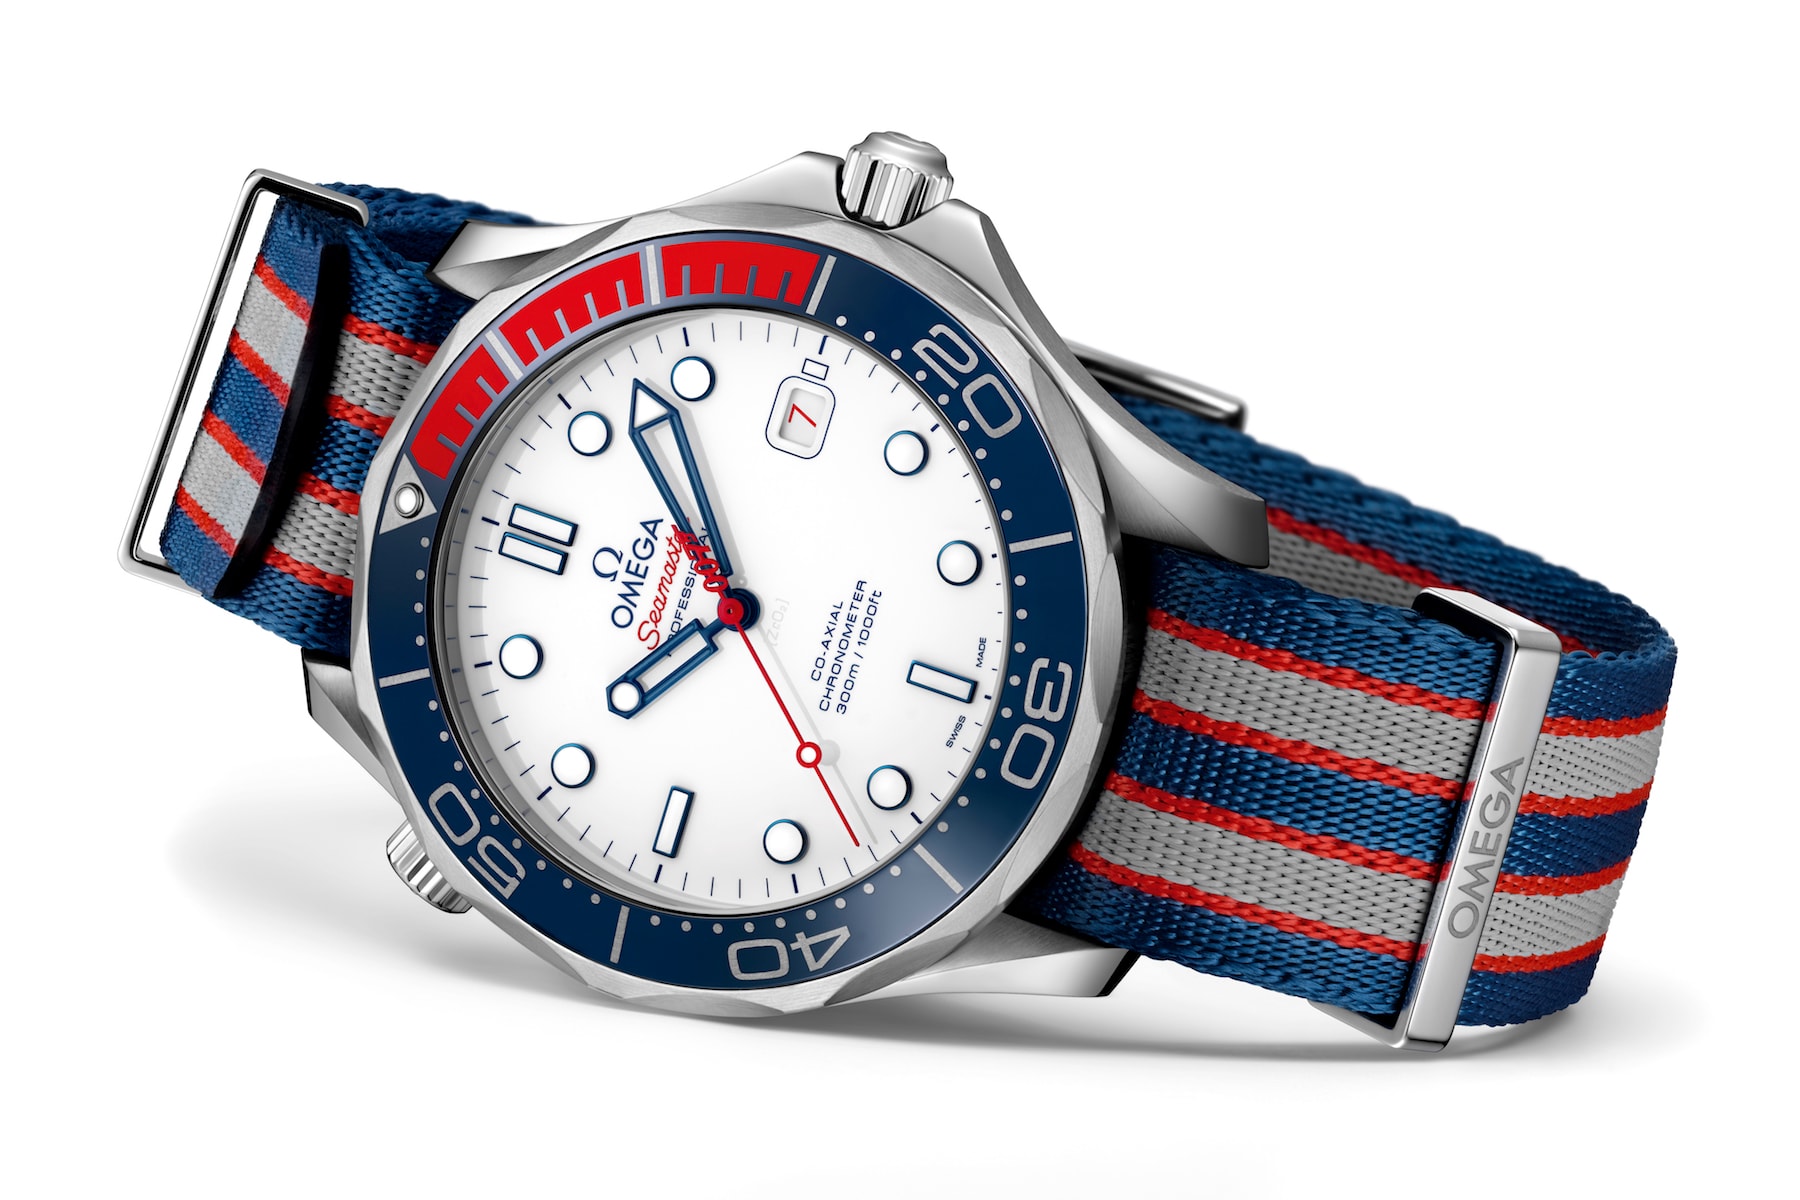 OMEGA Seamaster Diver 300m “Commander’s Watch” Limited Edition